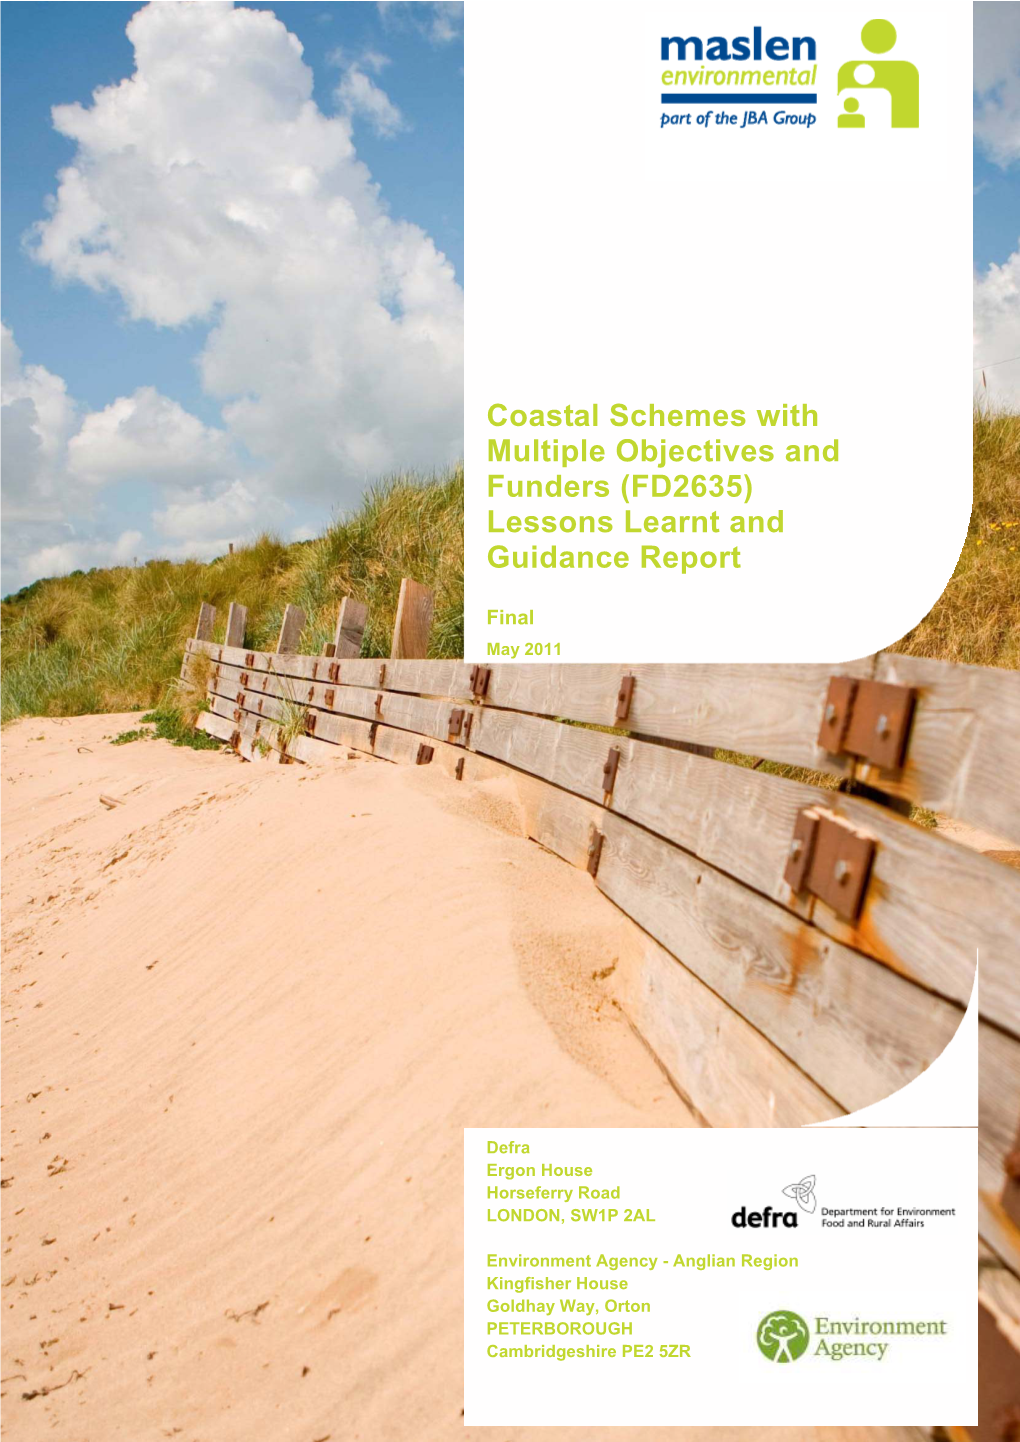 Coastal Schemes with Multiple Objectives and Funders (FD2635) Lessons Learnt and Guidance Report